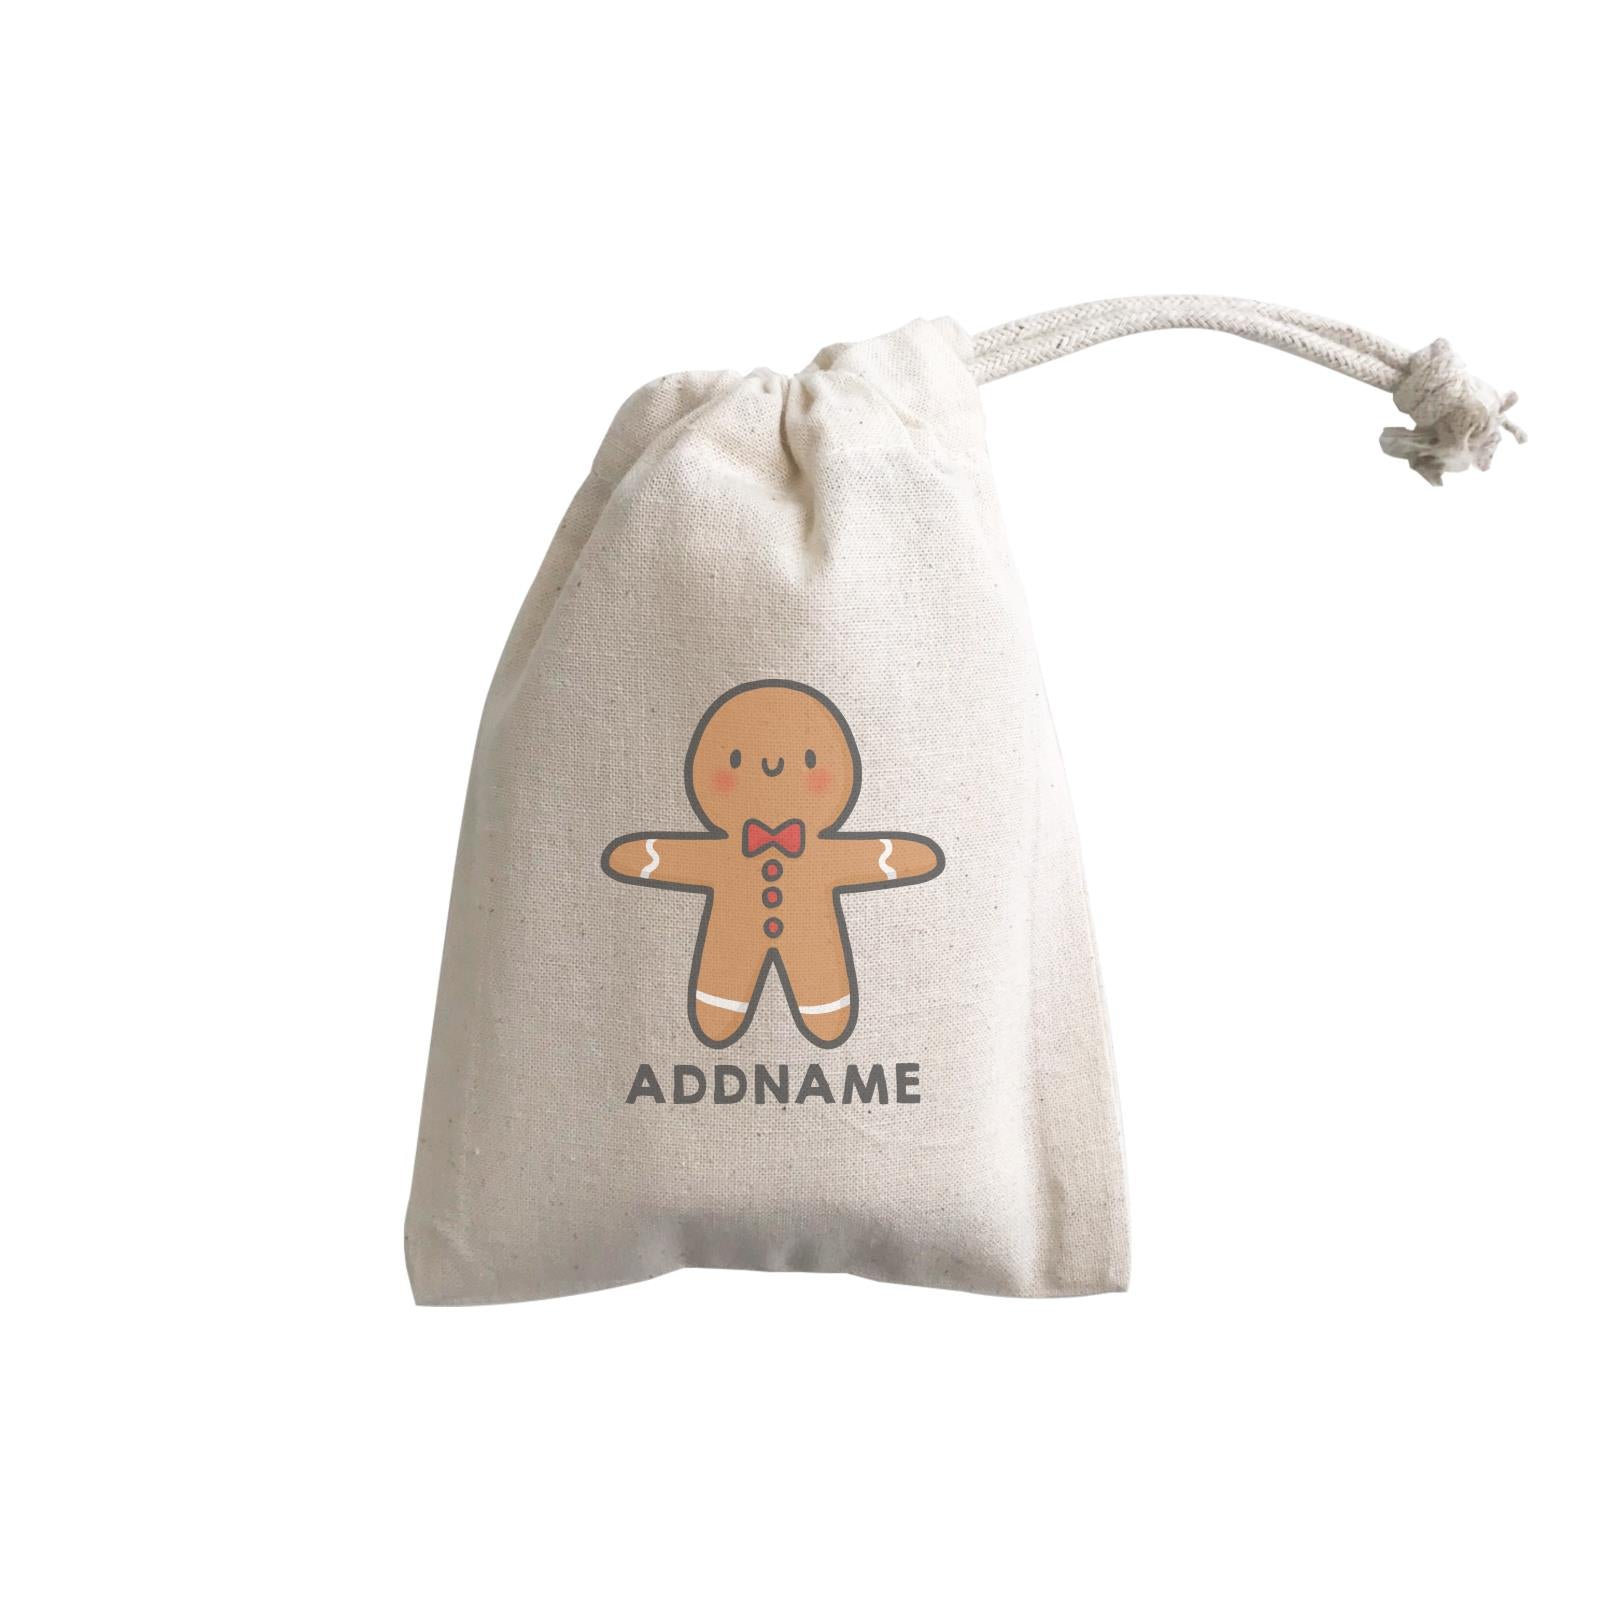 Xmas Cute Gingerbread Man Addname GP Gift Pouch